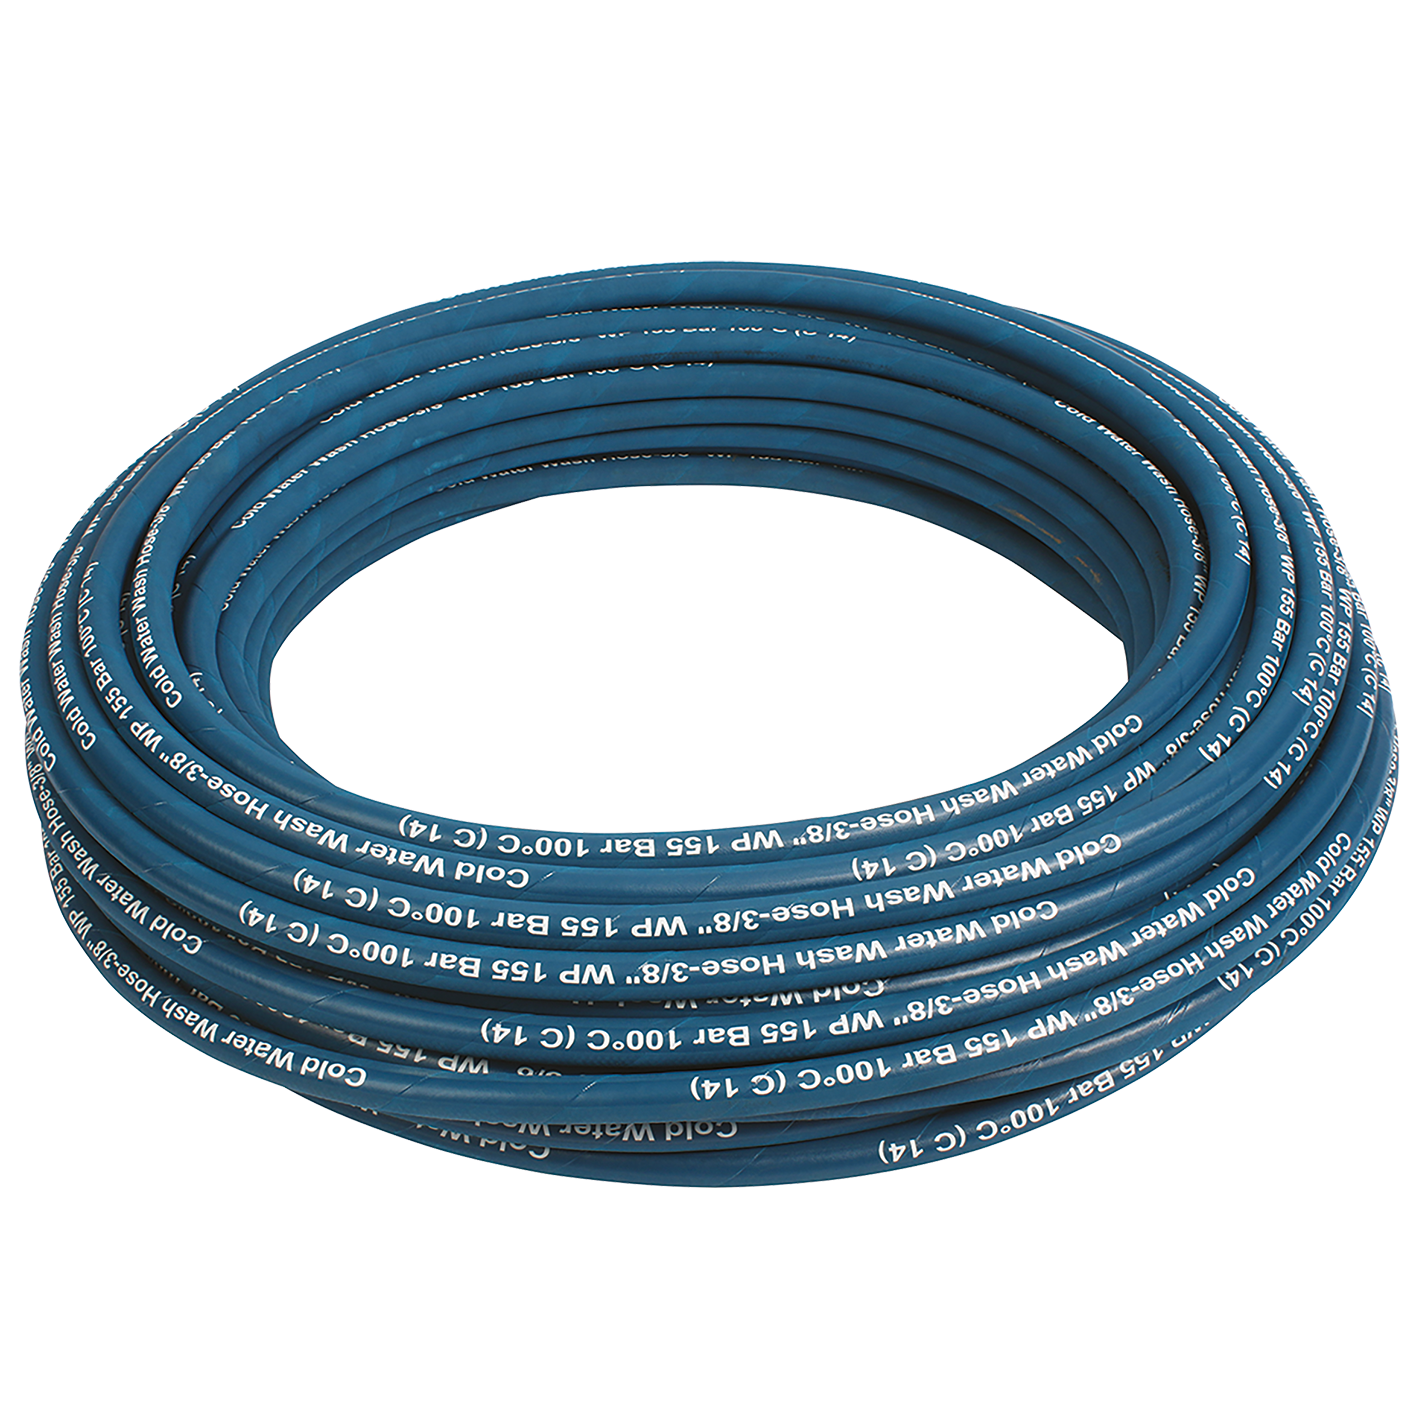 COLD WATER 1/4" R2 BLUE 25M